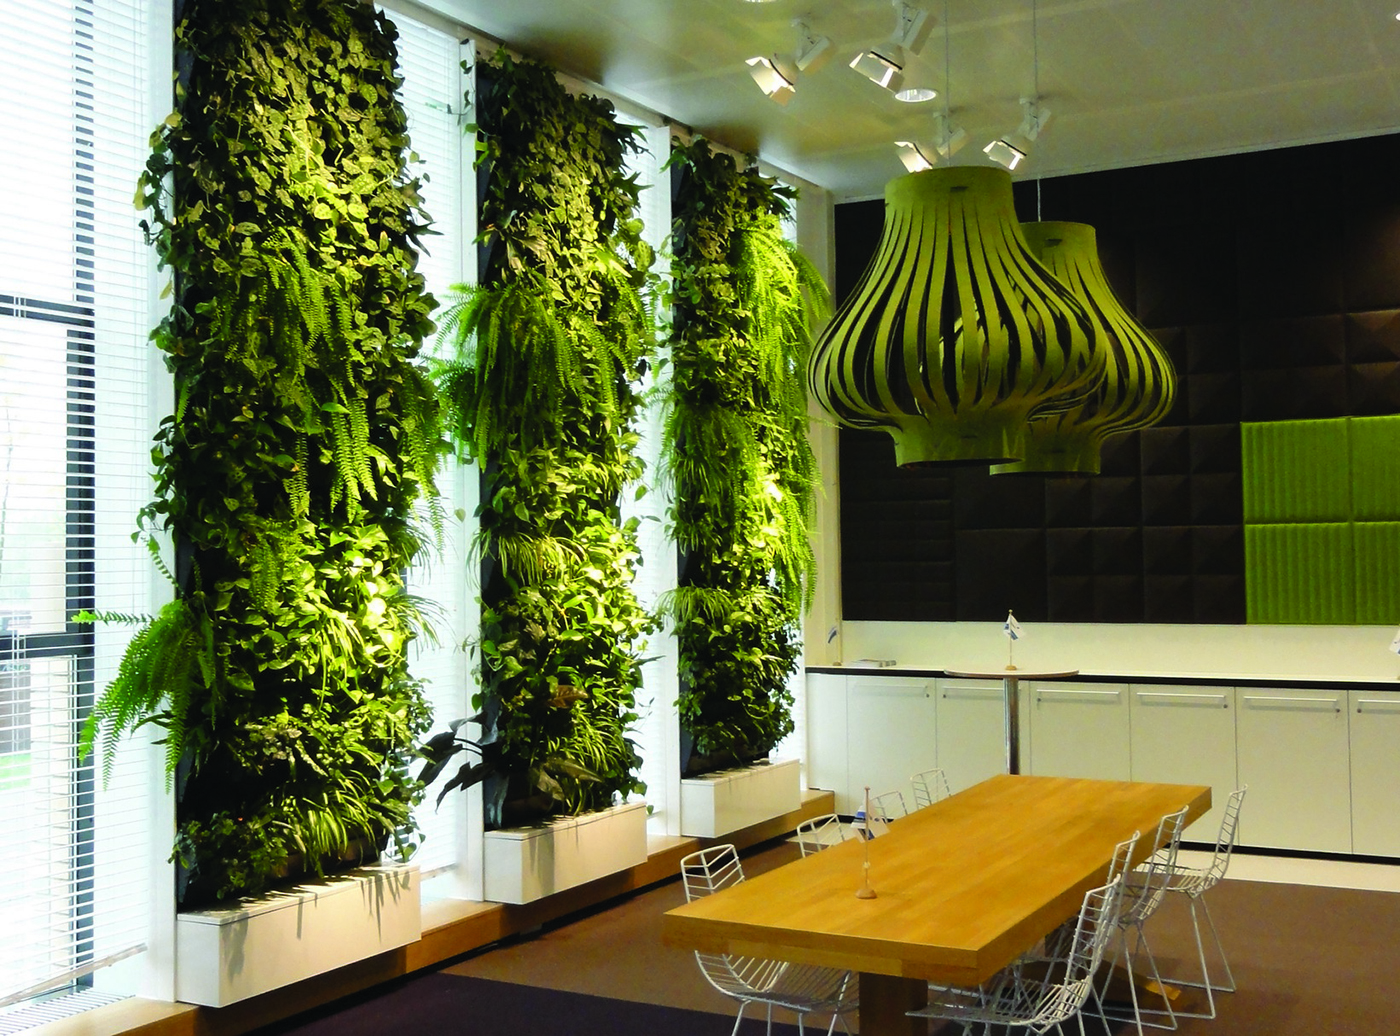 The natural walls at Volker Wessels Acadamy in Amersfoort by Zuidkoop Natural Projects